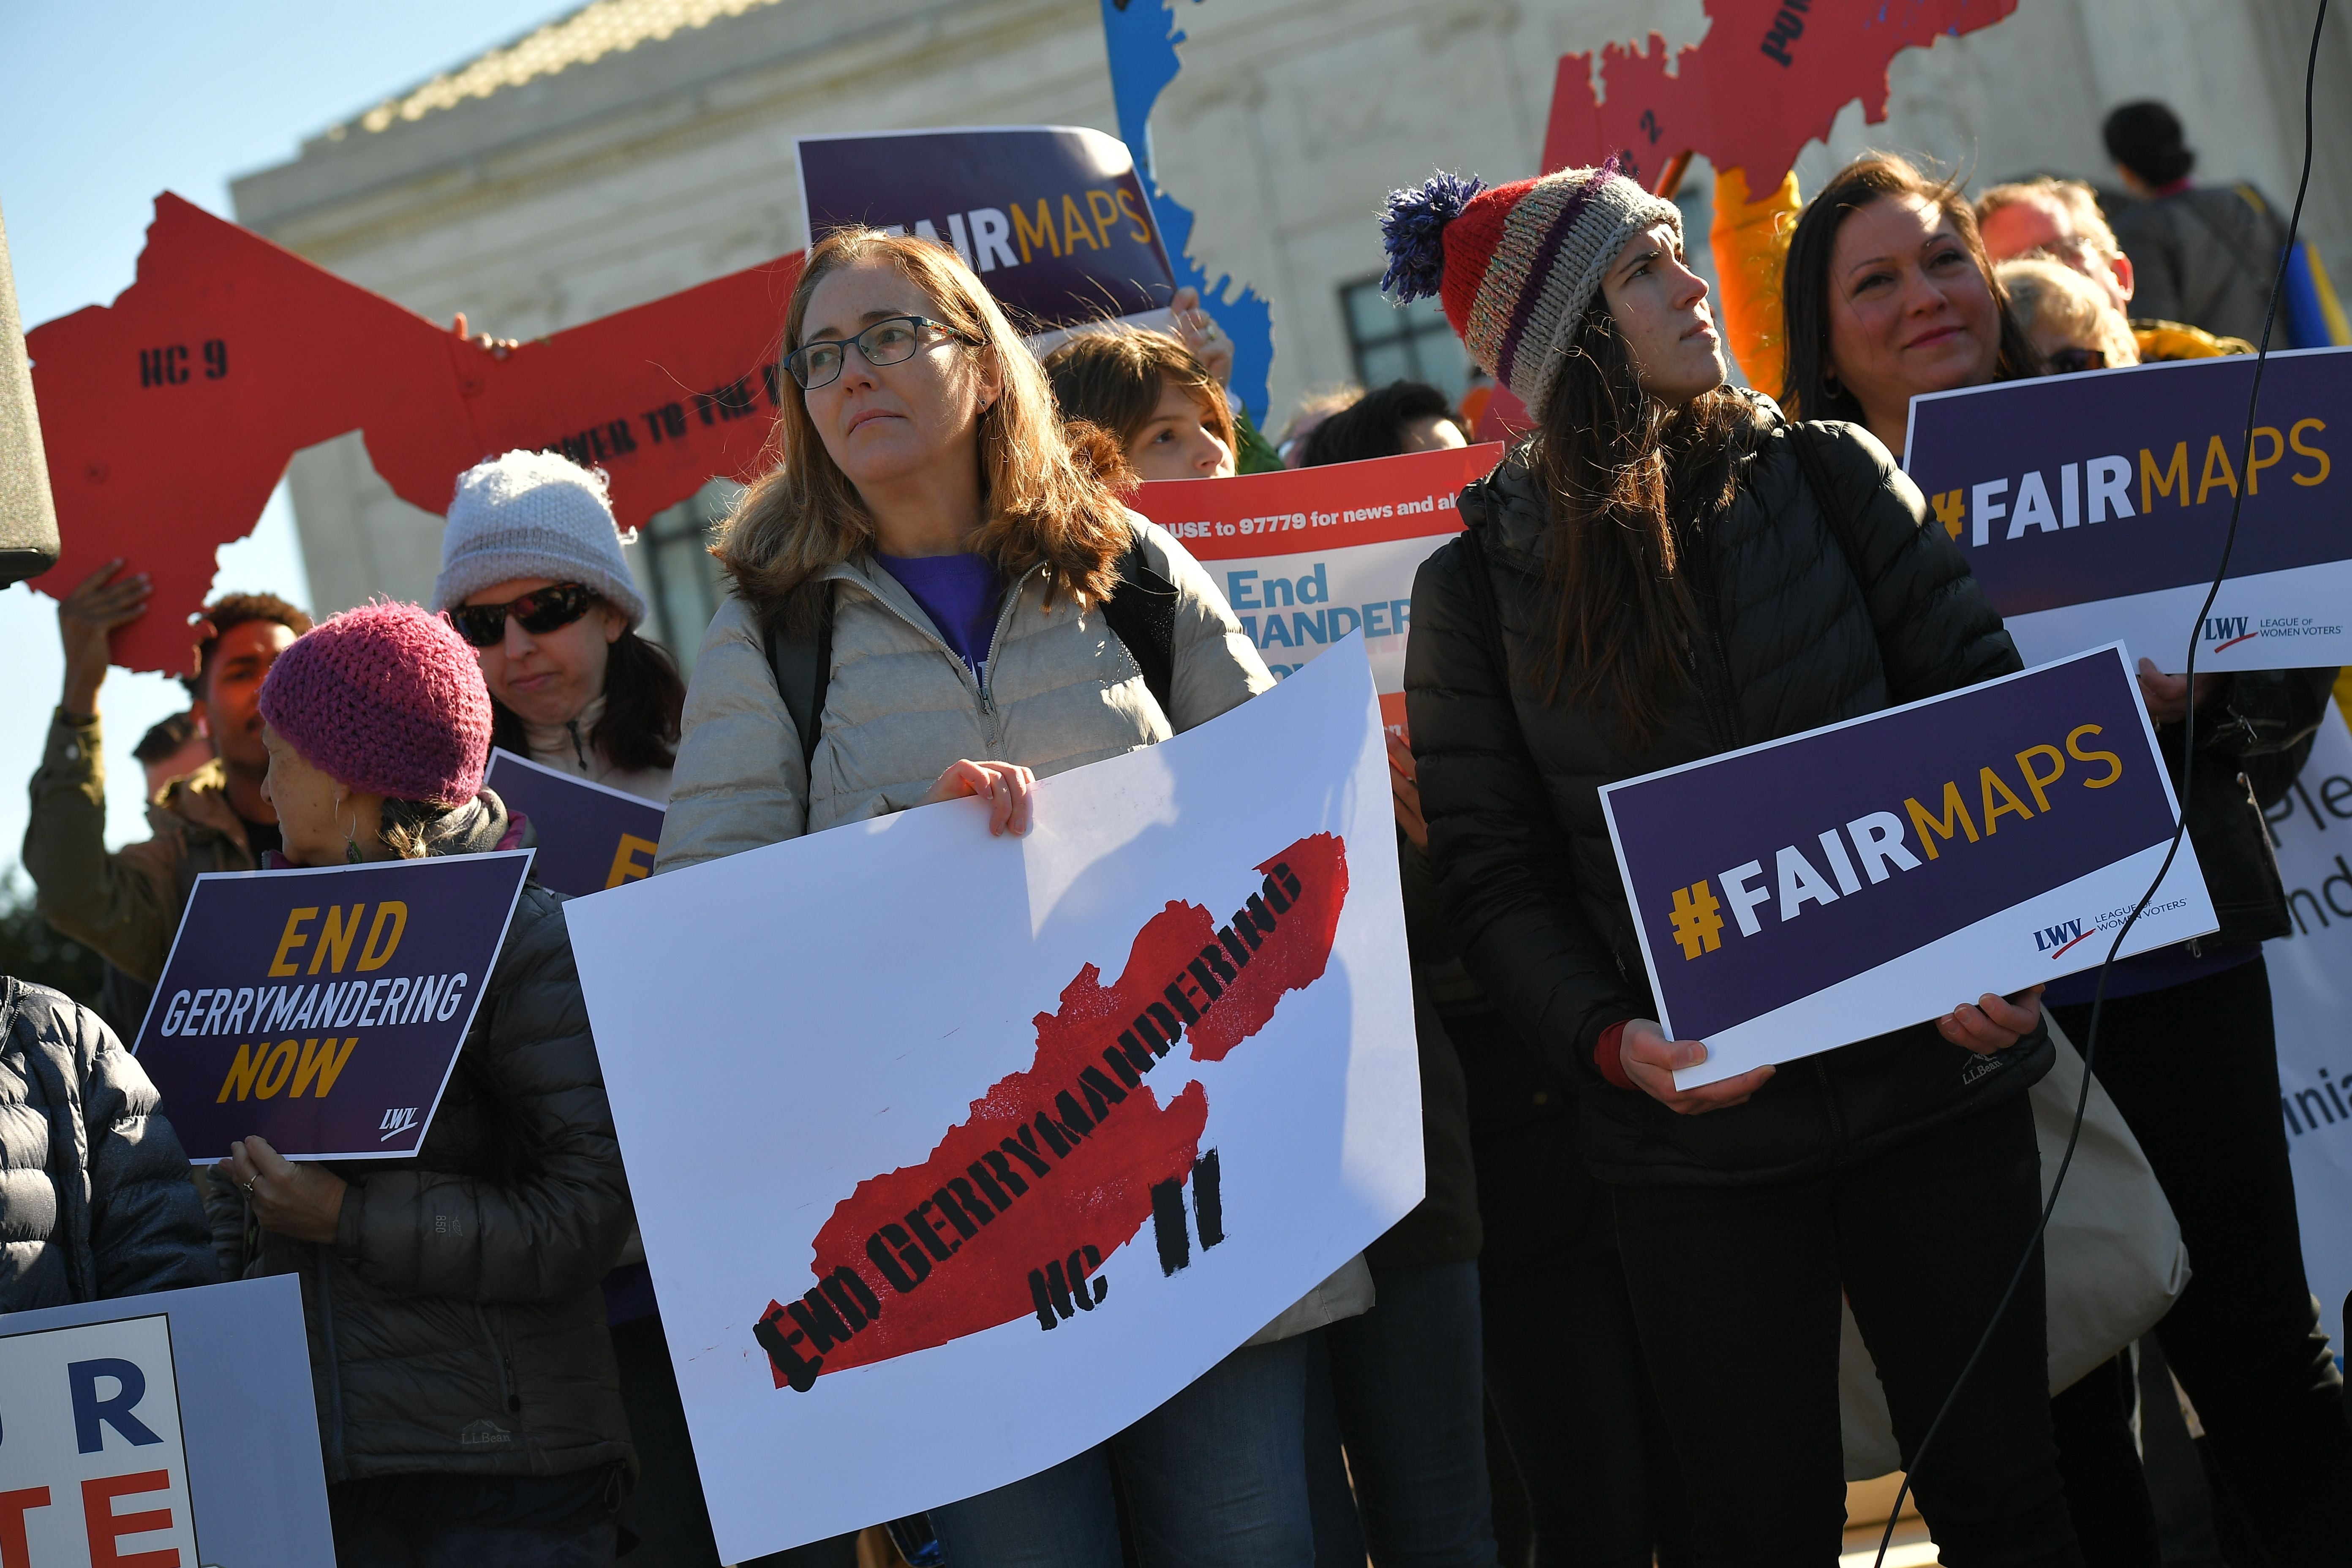 A protest in front of the US Supreme Court in 2019 demanded an end to partisan gerrymandering, the drawing of political boundaties for elections that benefit one party. A new case in front of the justices could open the door for state lawmakers to increased gerrymandering.